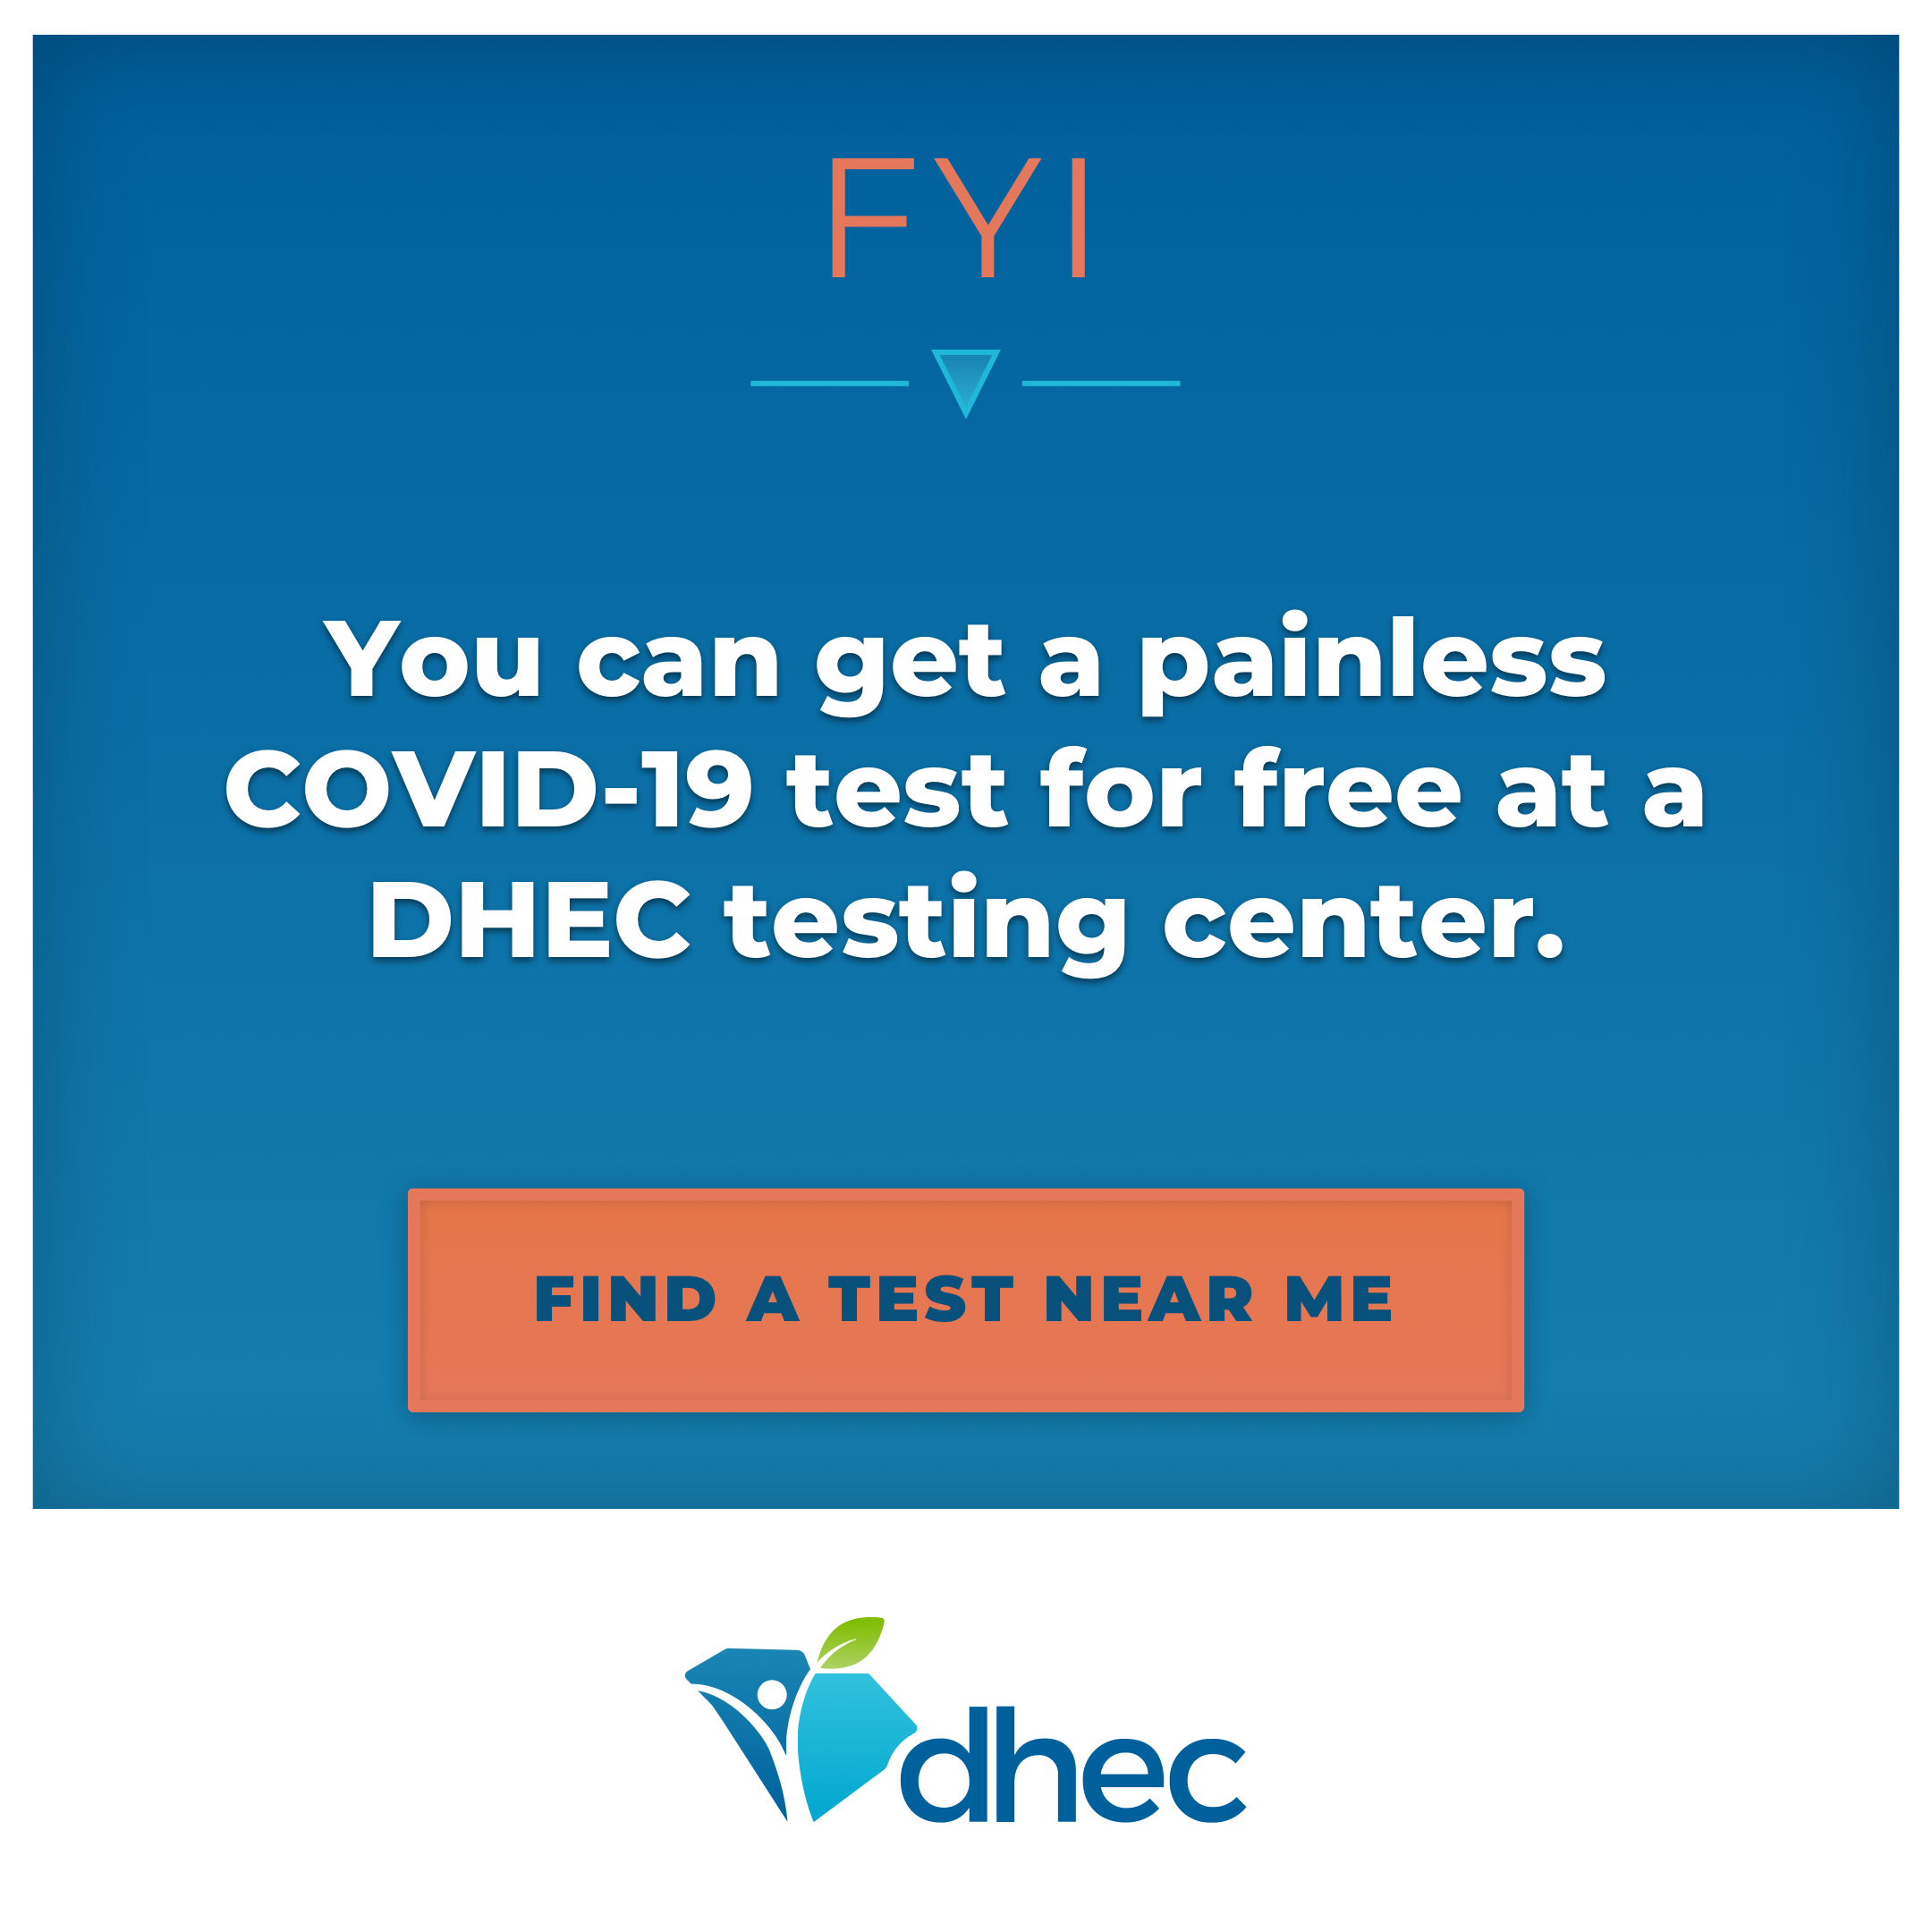 Free Painless test at DHEC testing center